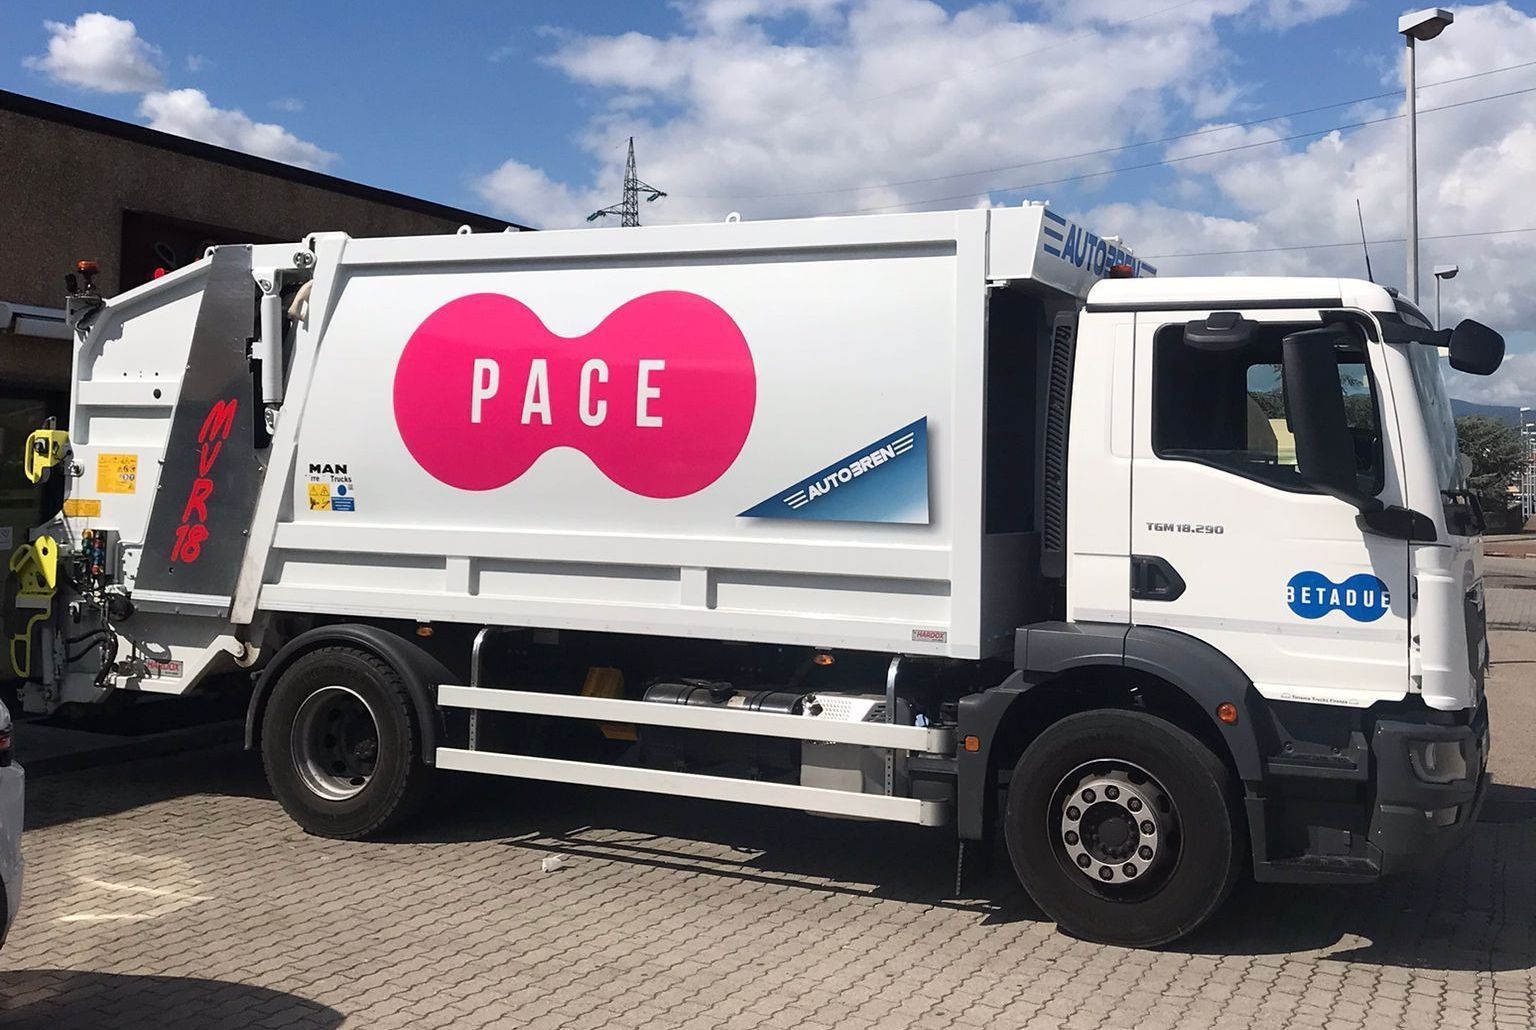 camion pace betadue